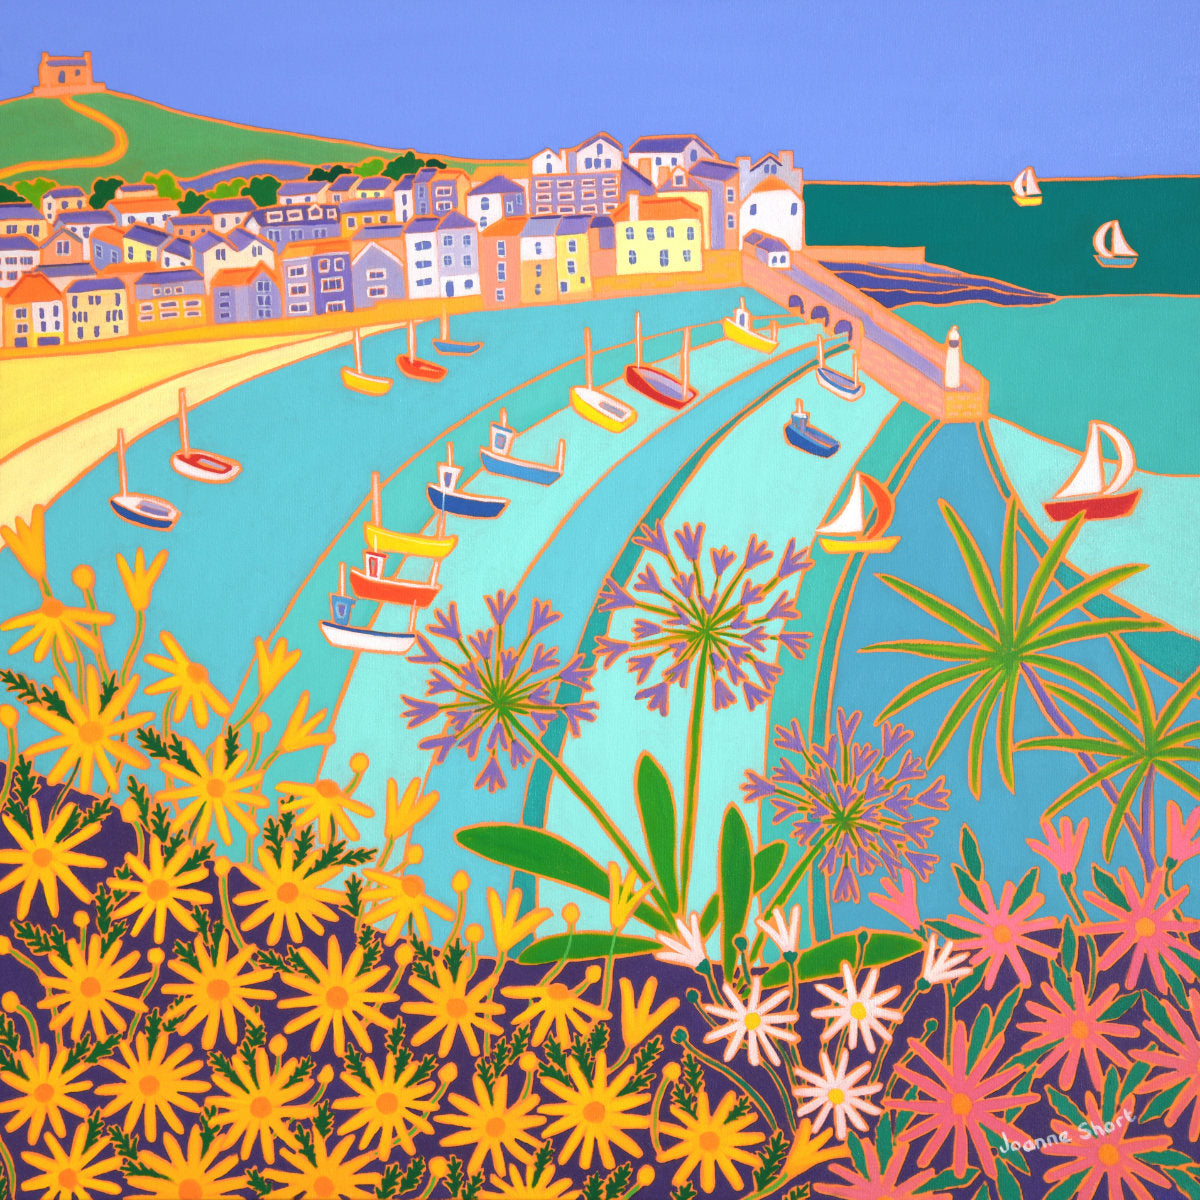 &#39;Sunny Seaside flowers, St Ives’. 24x24 inches oil on canvas. Garden Painting of Cornwall by Cornish Artist Joanne Short from our Cornwall Art Gallery